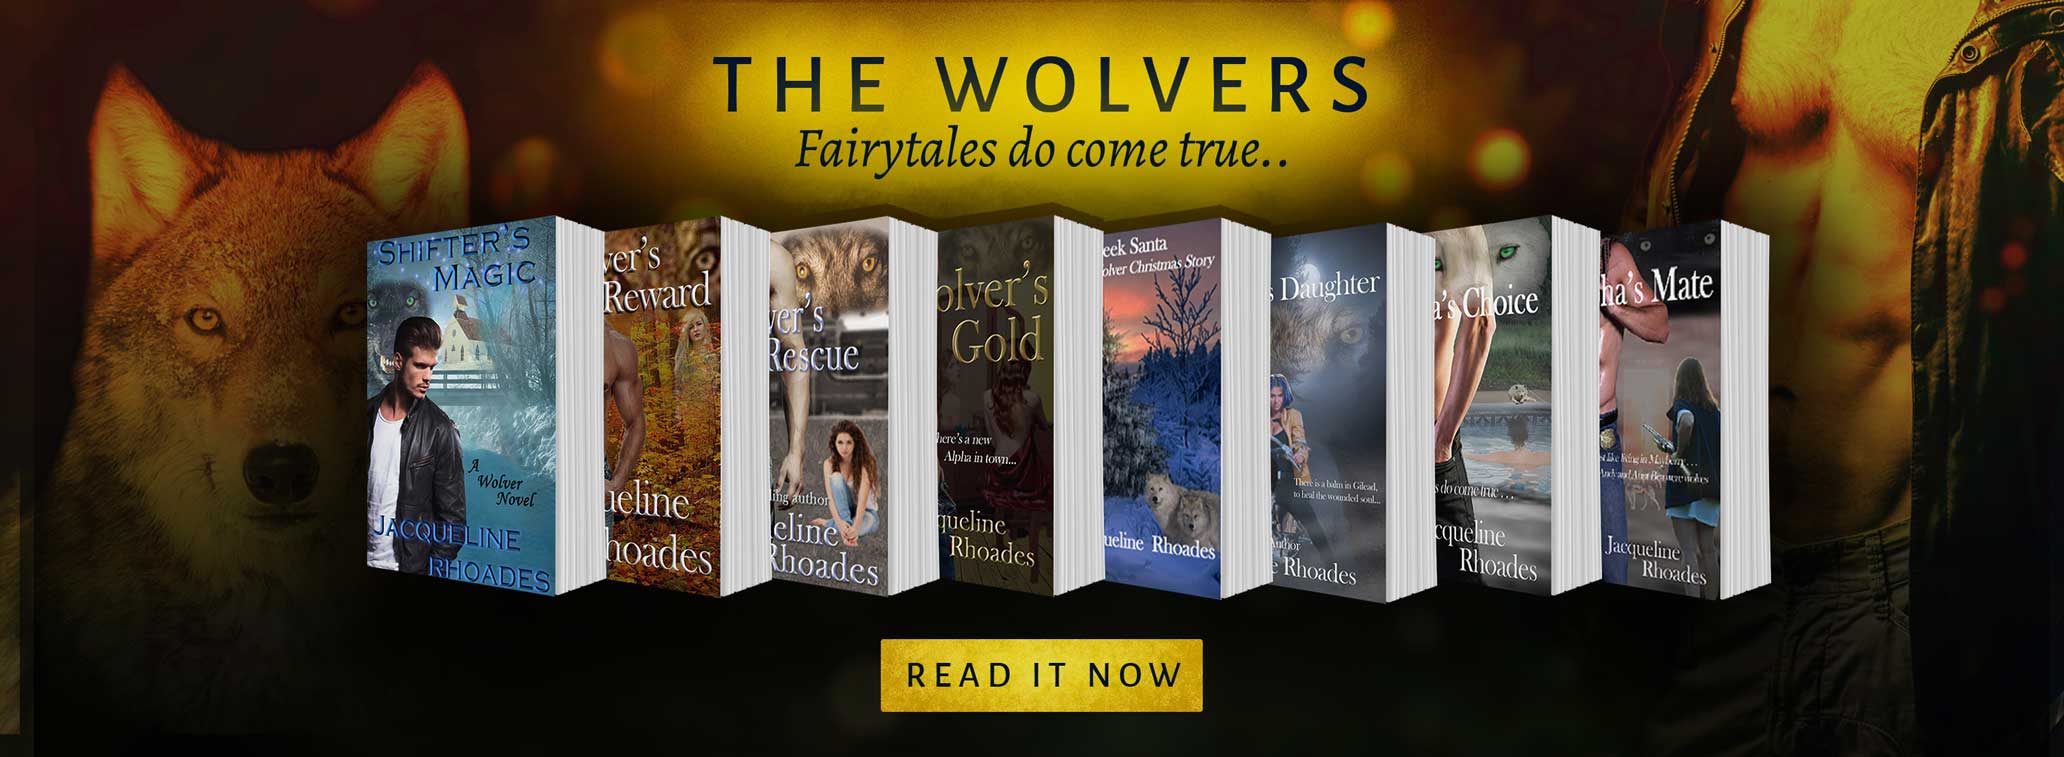 The Wolvers by Jacqueline Rhoades